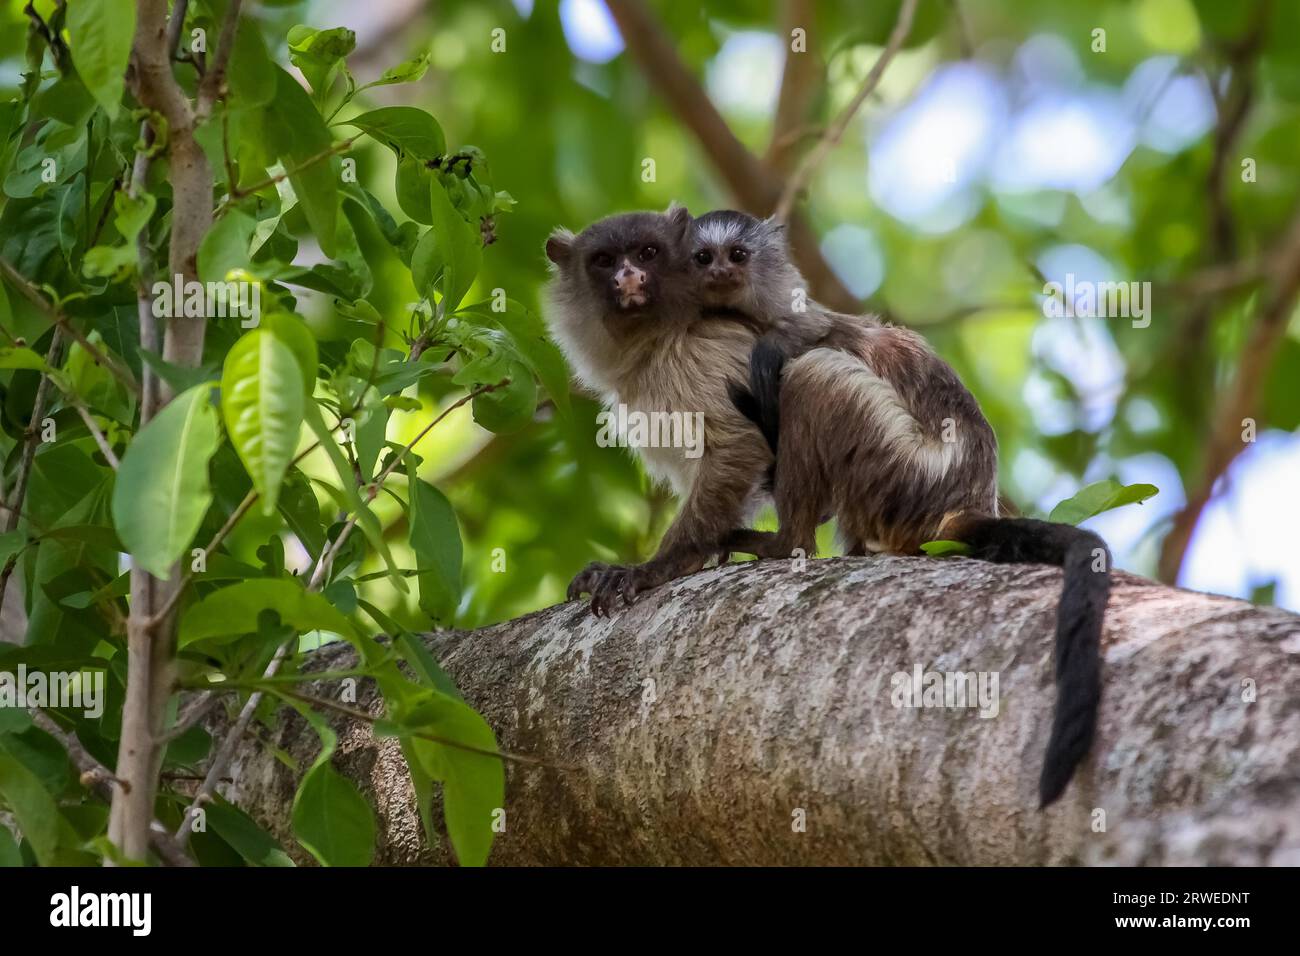 Black tailed marmoset with b Baby on the back, facing, in the forest, Pantanal, Brazil Stock Photo